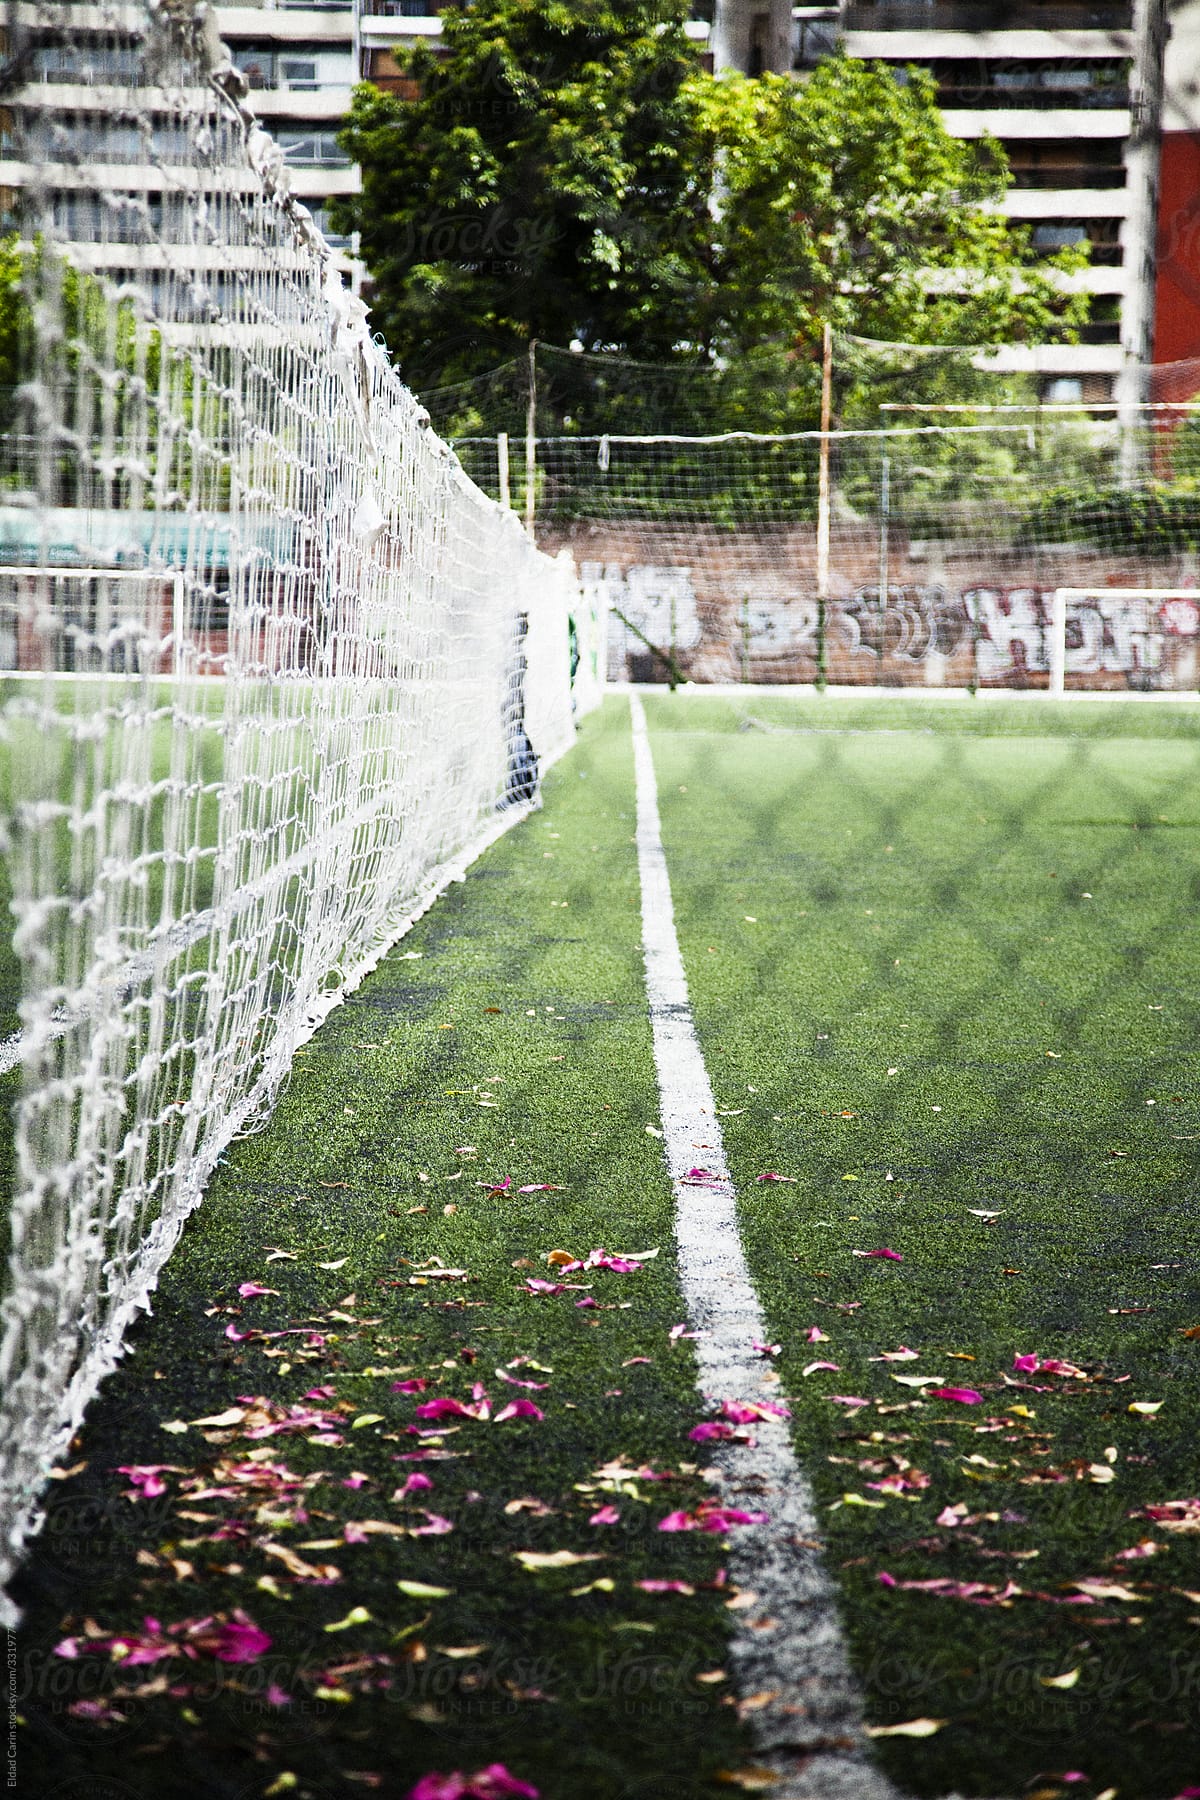 Urban Soccer Court and Netted Fences